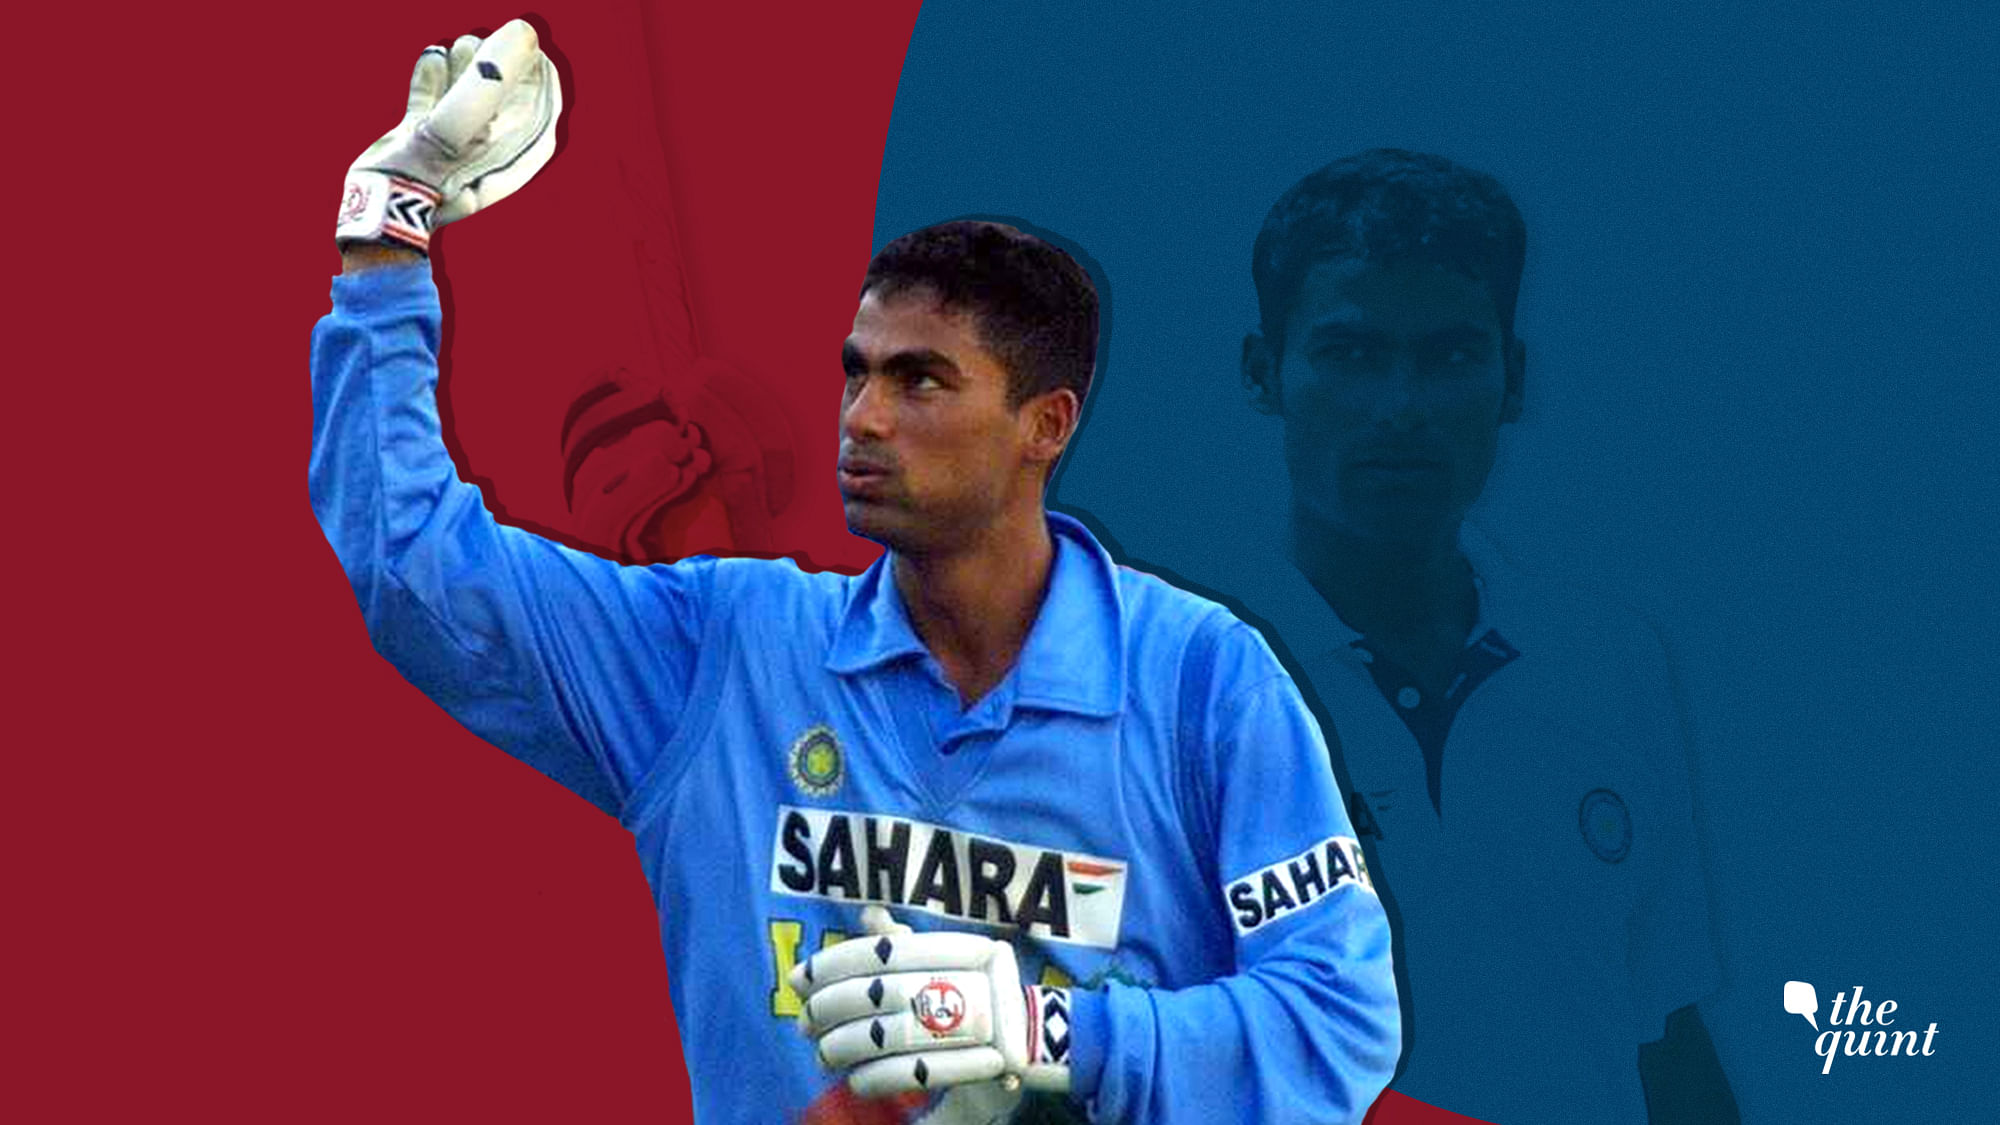 Mohammad Kaif announced his retirement in July, 2018 after 16 years of domestic and international cricket.